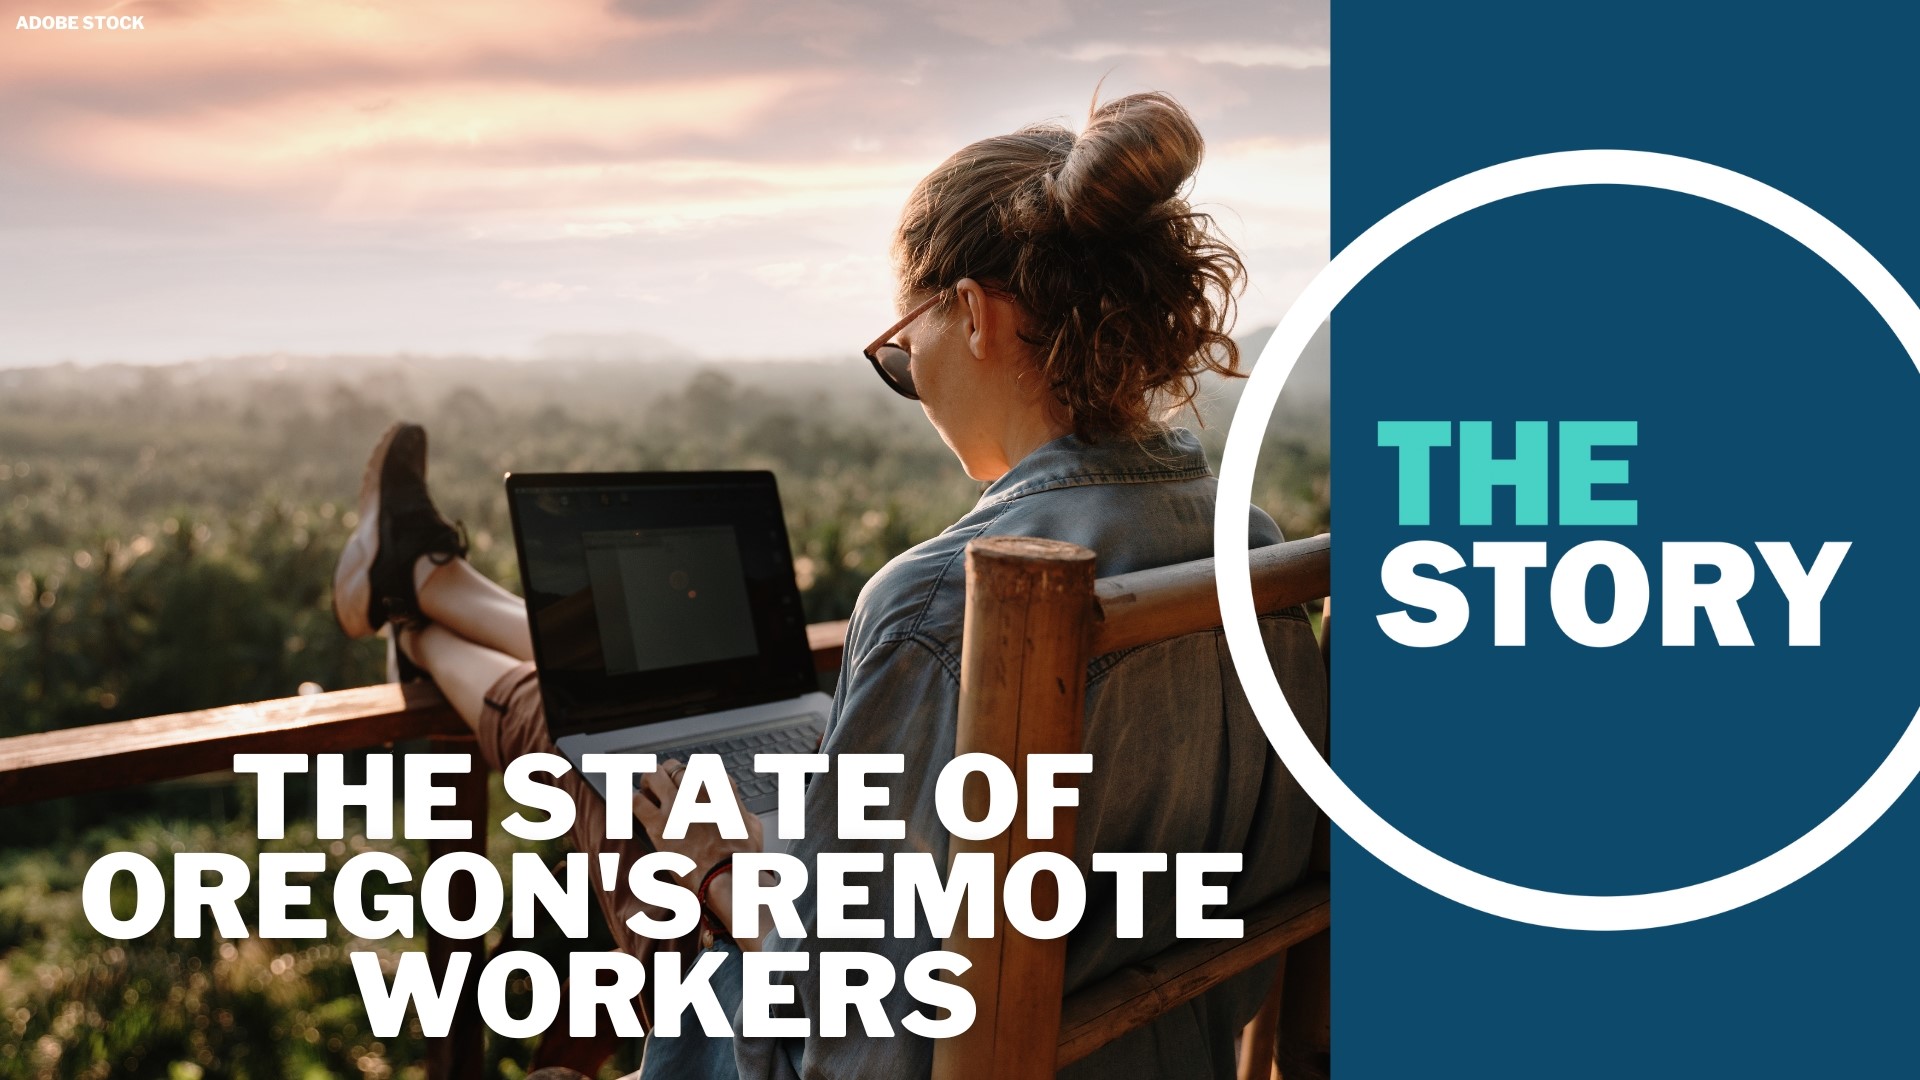 The pandemic expanded opportunities for remote work, which has a lot of upsides. But remote workers who aren't living locally also end up costing Oregonians.